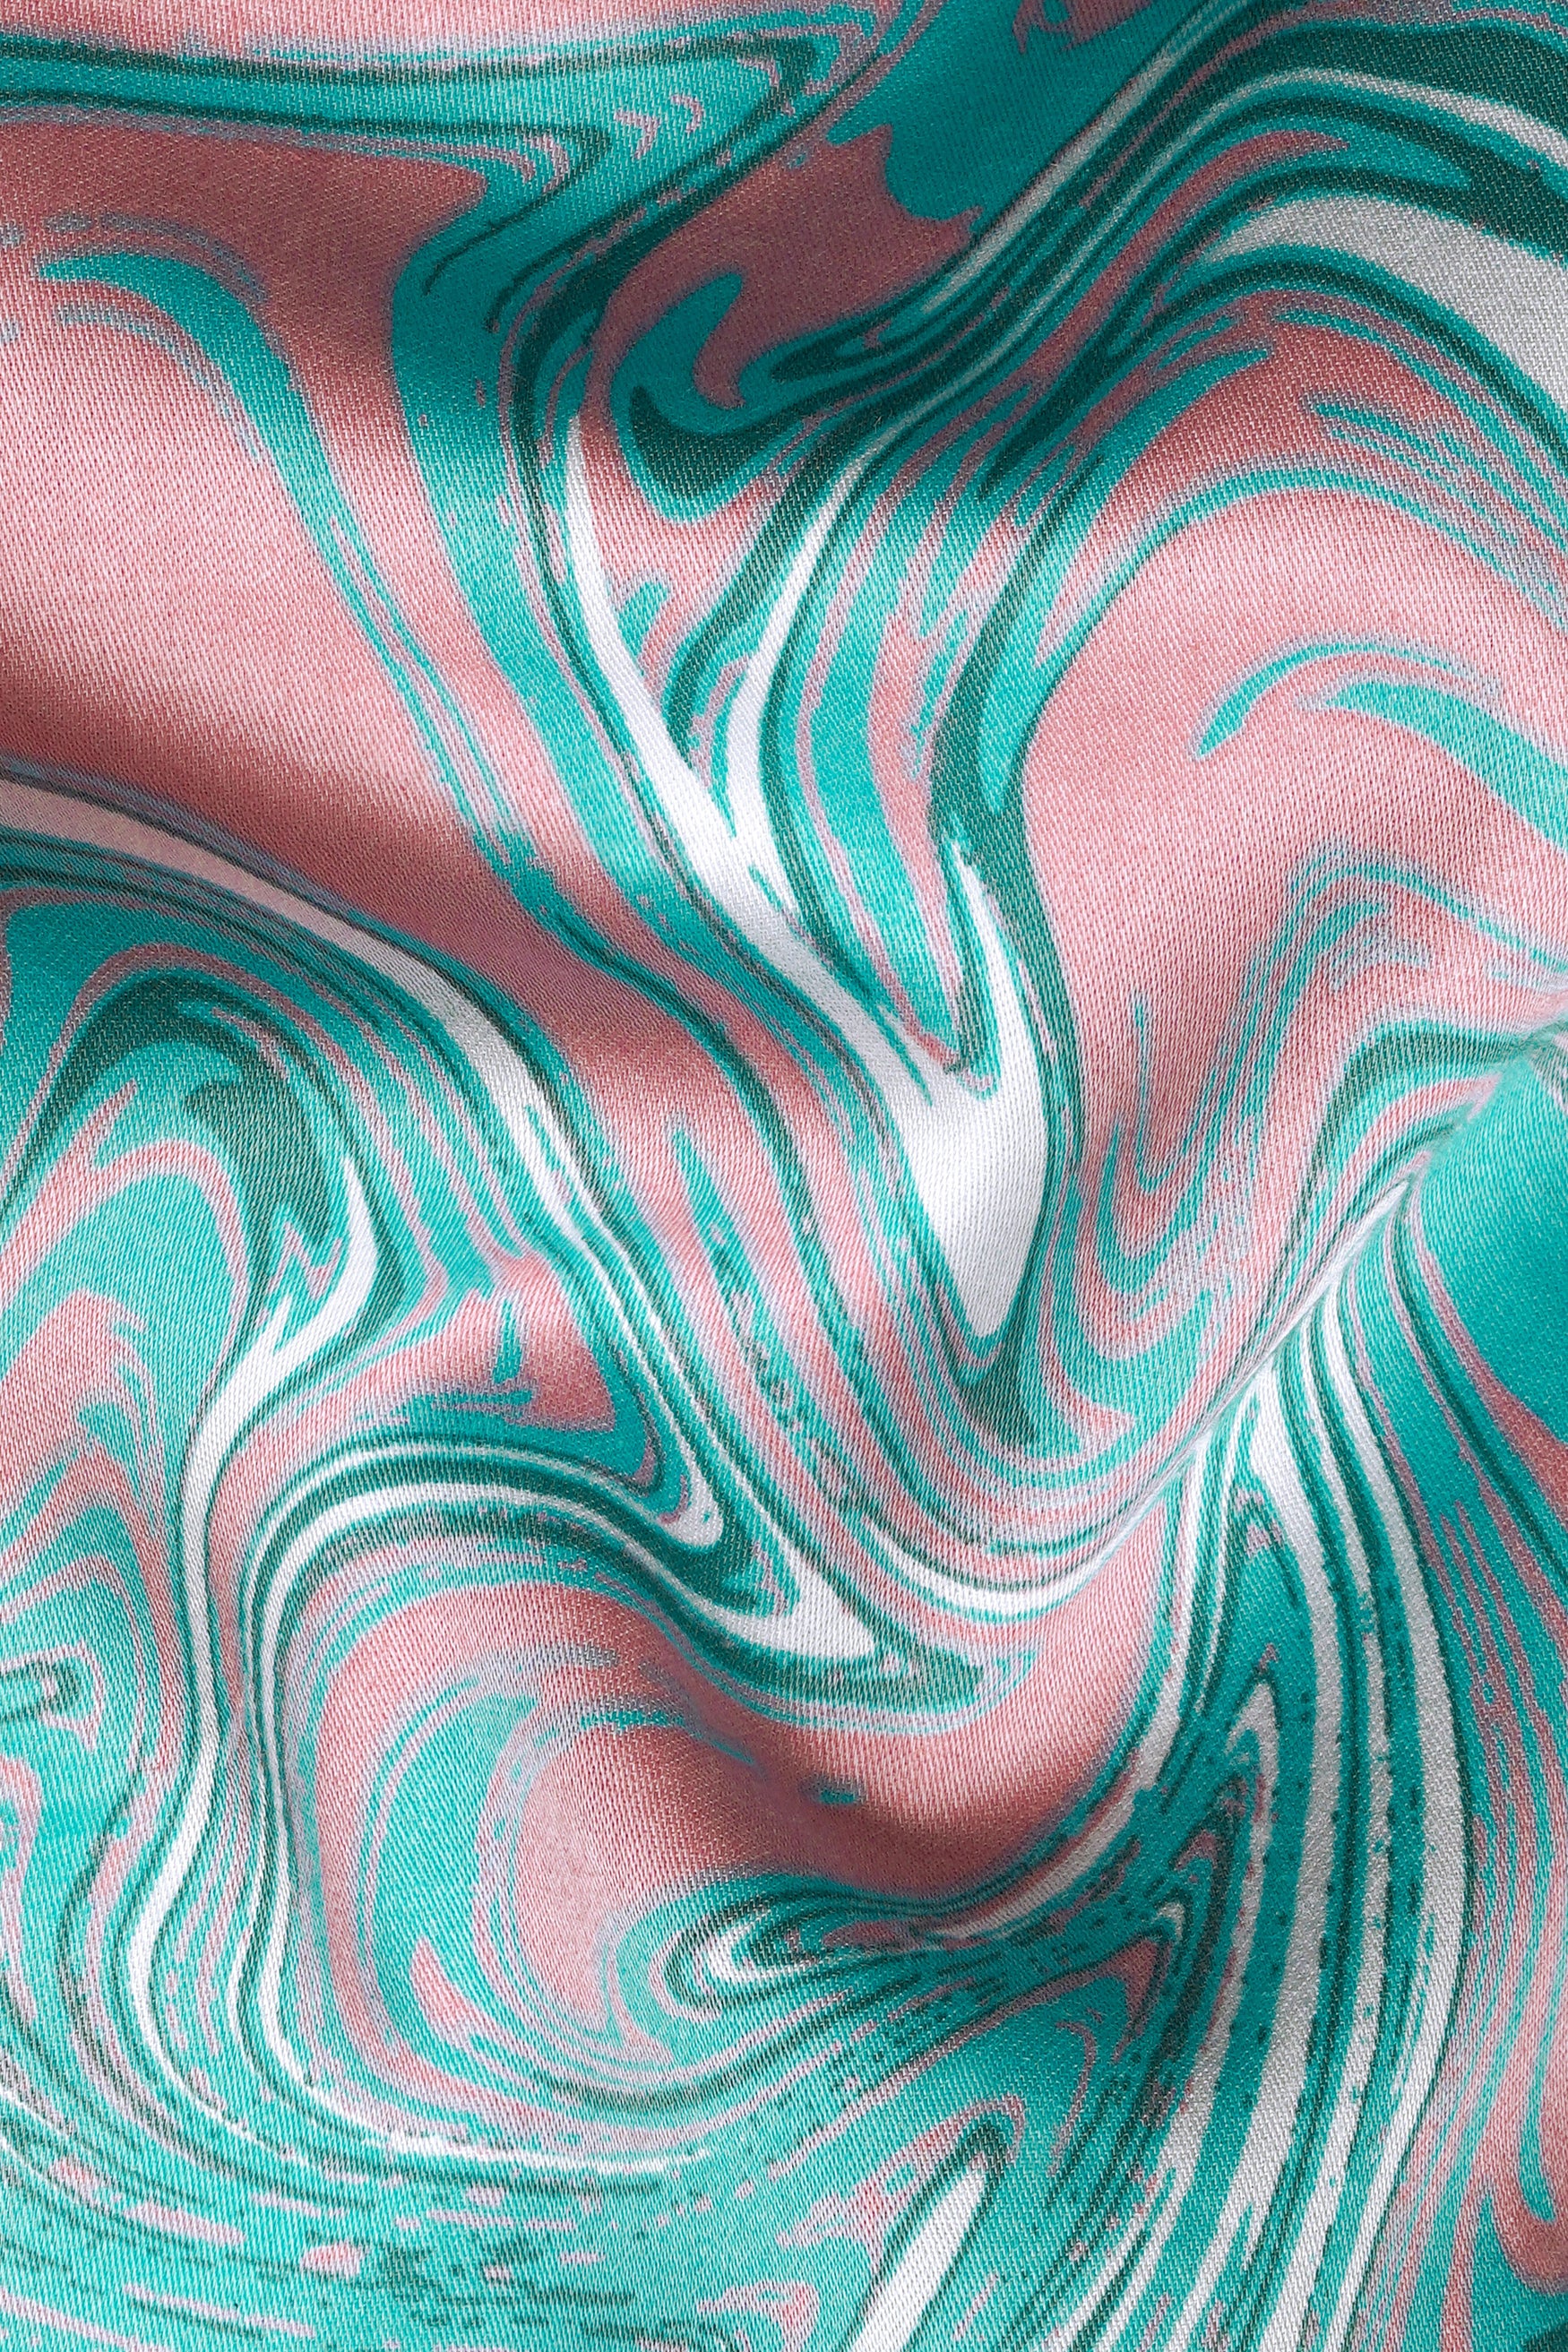 Teal Green with Blizzard Blue and Cavern Pink Marble Printed Subtle Sheen Super Soft Premium Cotton Designer Shirt 11949-P815-38, 11949-P815-H-38, 11949-P815-39, 11949-P815-H-39, 11949-P815-40, 11949-P815-H-40, 11949-P815-42, 11949-P815-H-42, 11949-P815-44, 11949-P815-H-44, 11949-P815-46, 11949-P815-H-46, 11949-P815-48, 11949-P815-H-48, 11949-P815-50, 11949-P815-H-50, 11949-P815-52, 11949-P815-H-52